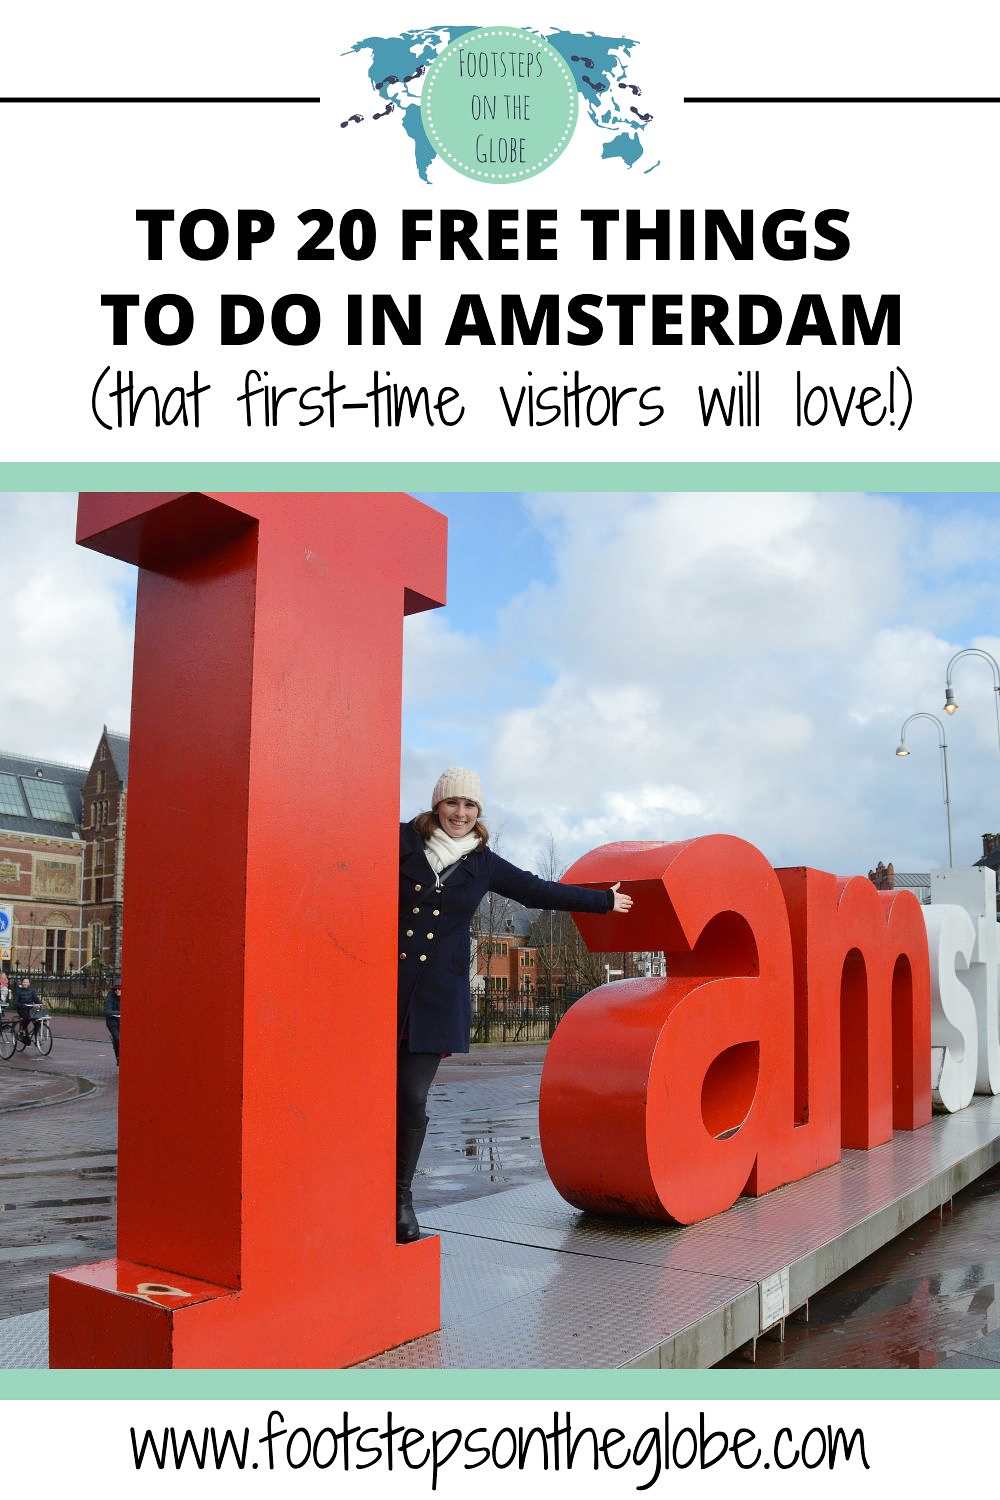 Mel posing on the I on Amsterdam's famous Iamsterdam sign with the text: "Top 20 free things to do in Amsterdam (that first-time visitors will love!) pinterest image